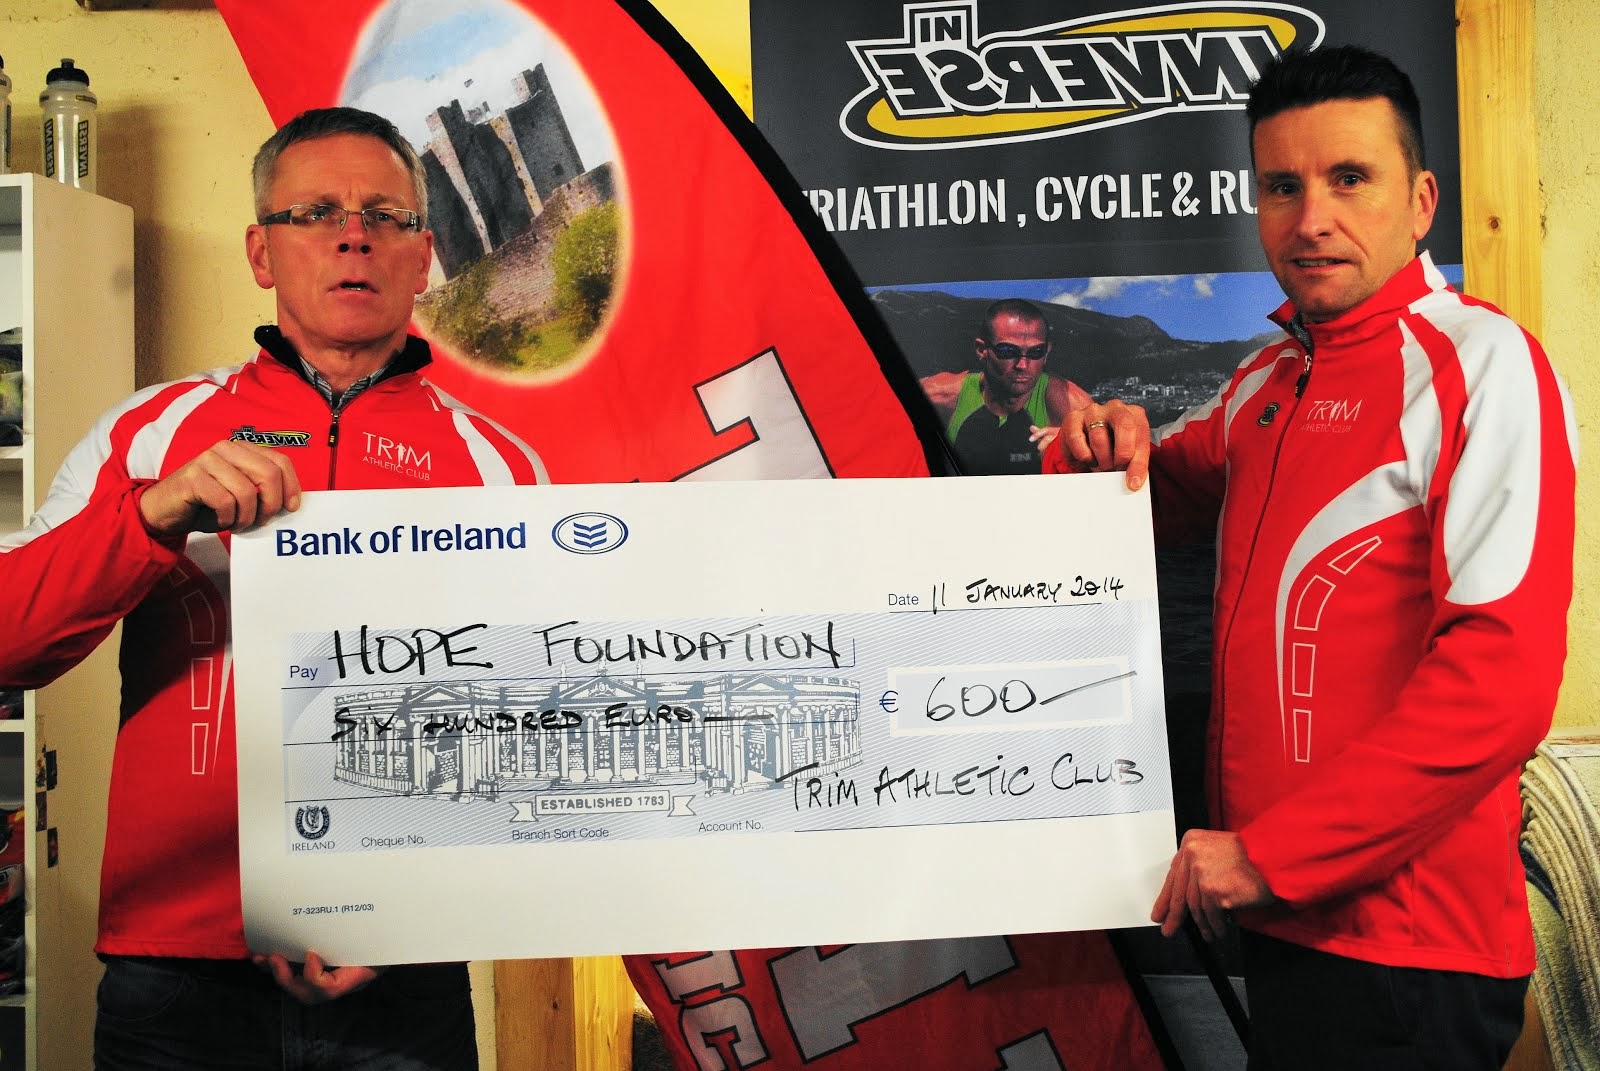 Hope Foundation receive €600